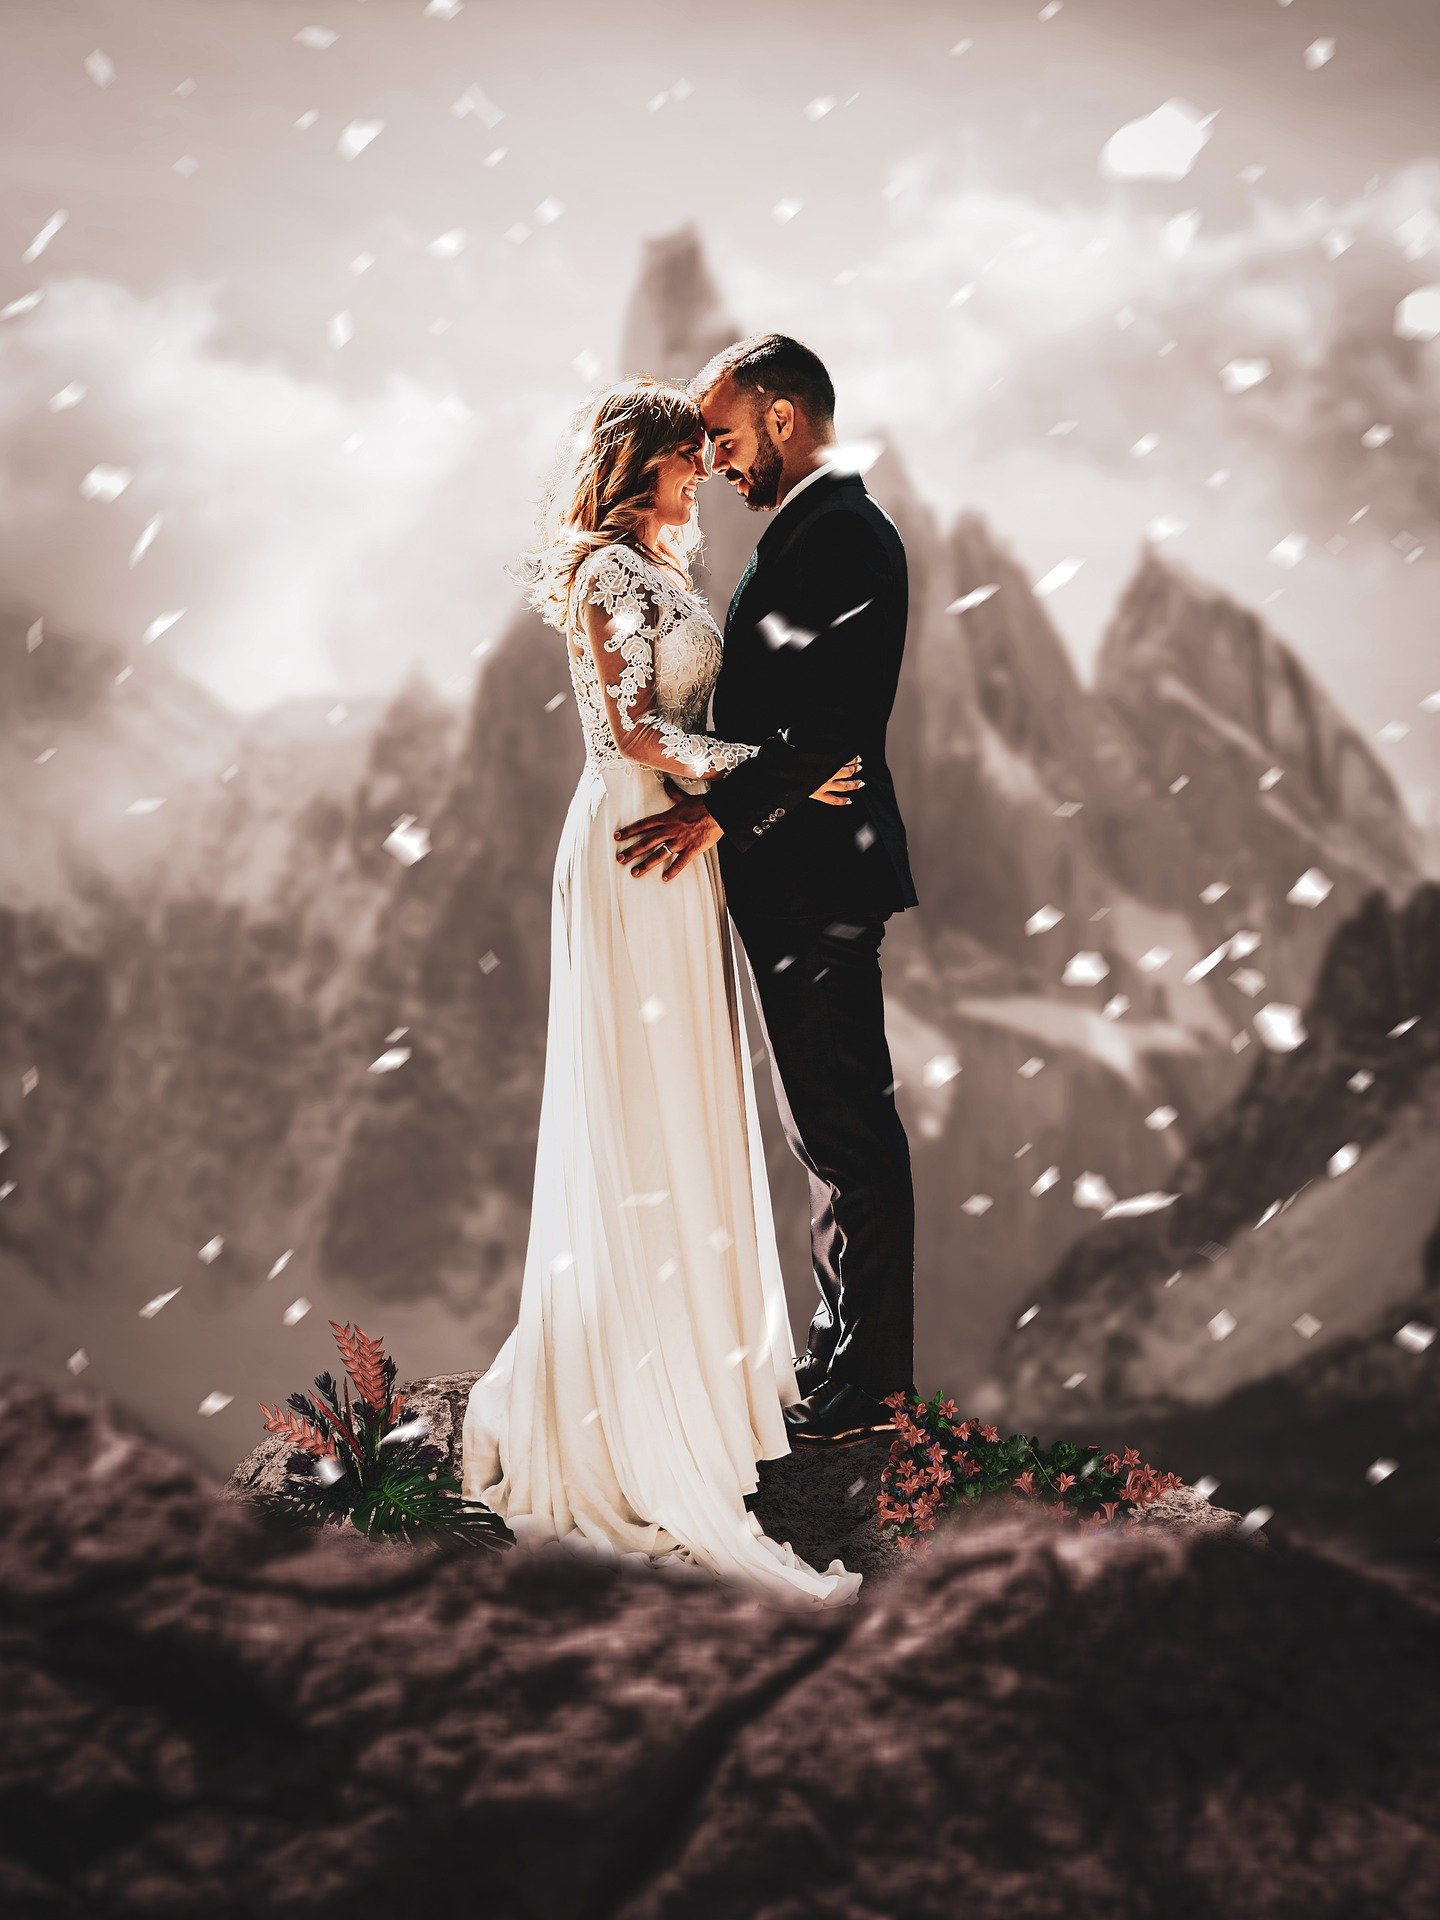 Six Good Reasons to Consider a Winter Wedding in 2020